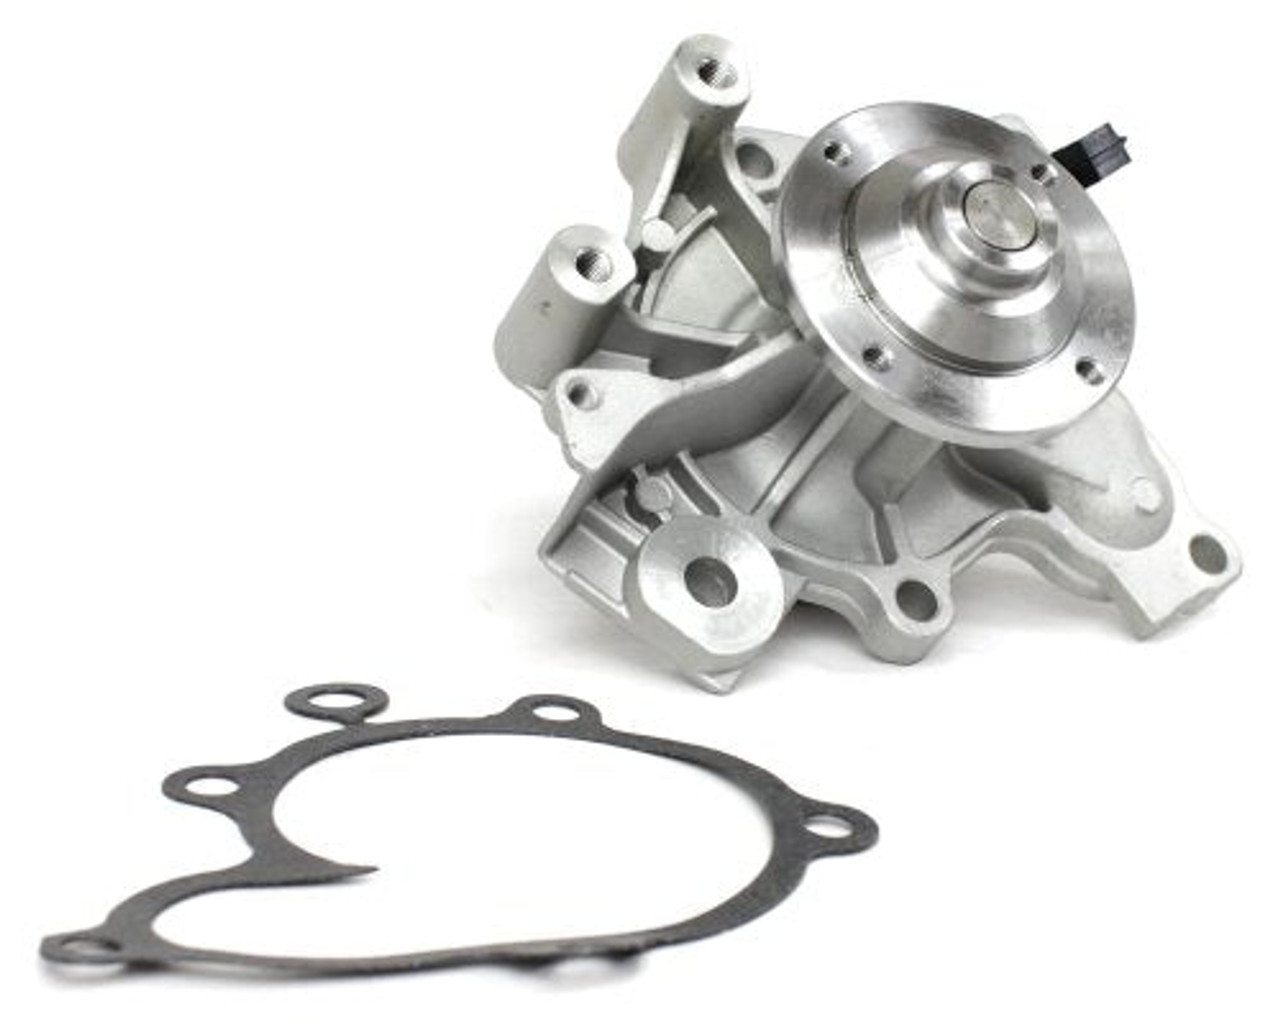 Water Pump - 1995 Ford Probe 2.0L Engine Parts # WP425ZE3